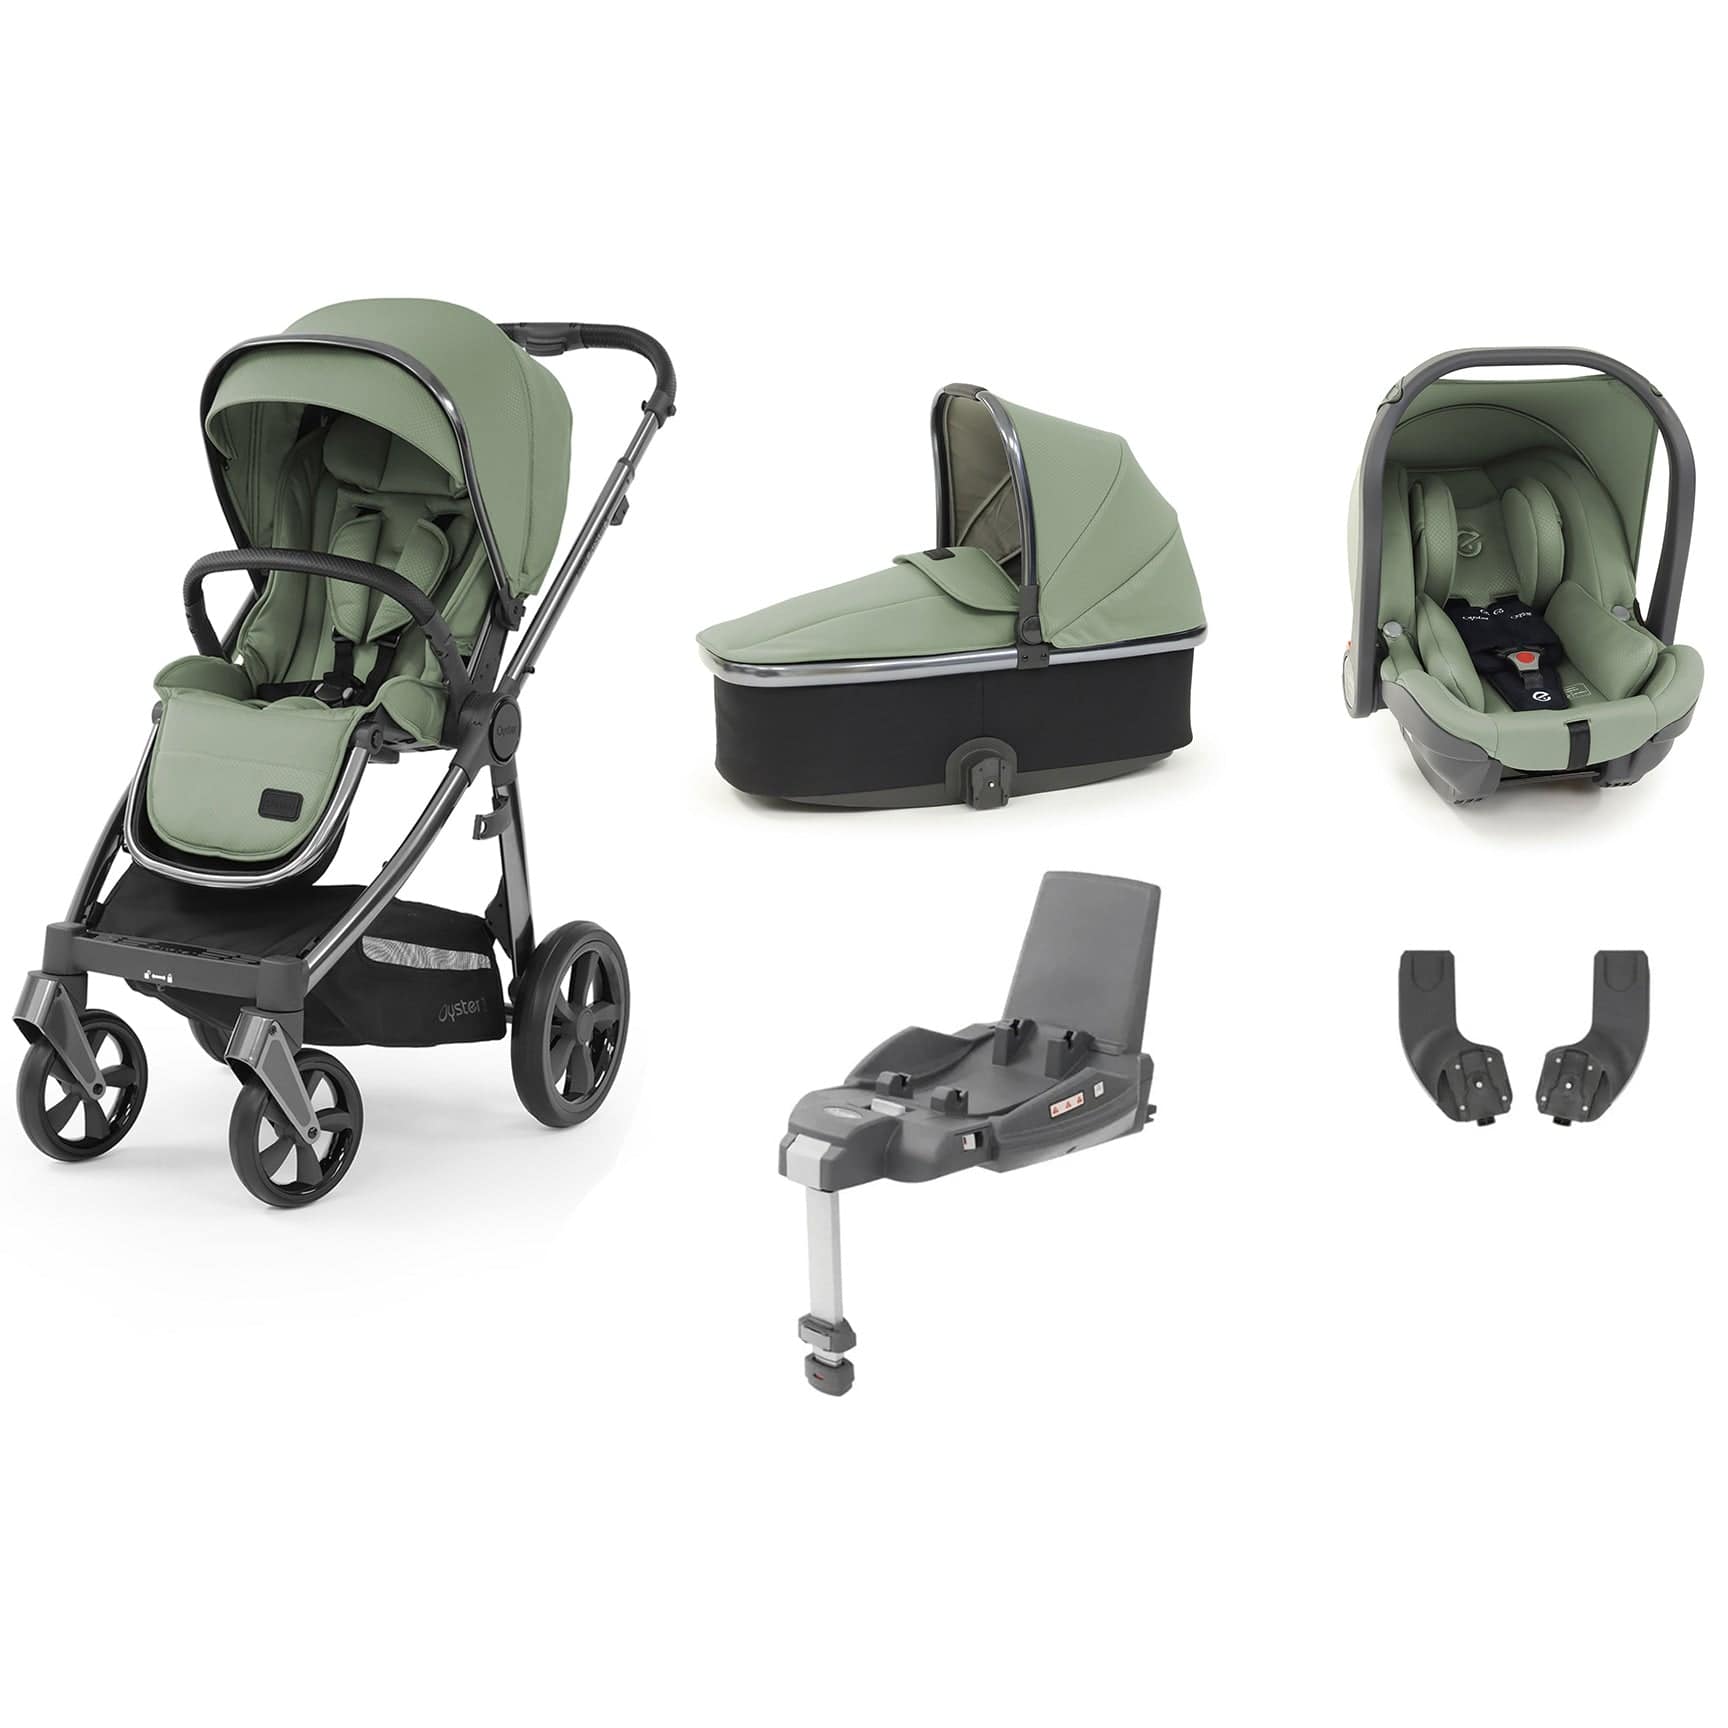 Babystyle Oyster 3 Essential Bundle with Car Seat in Spearmint Travel Systems 5060711564425